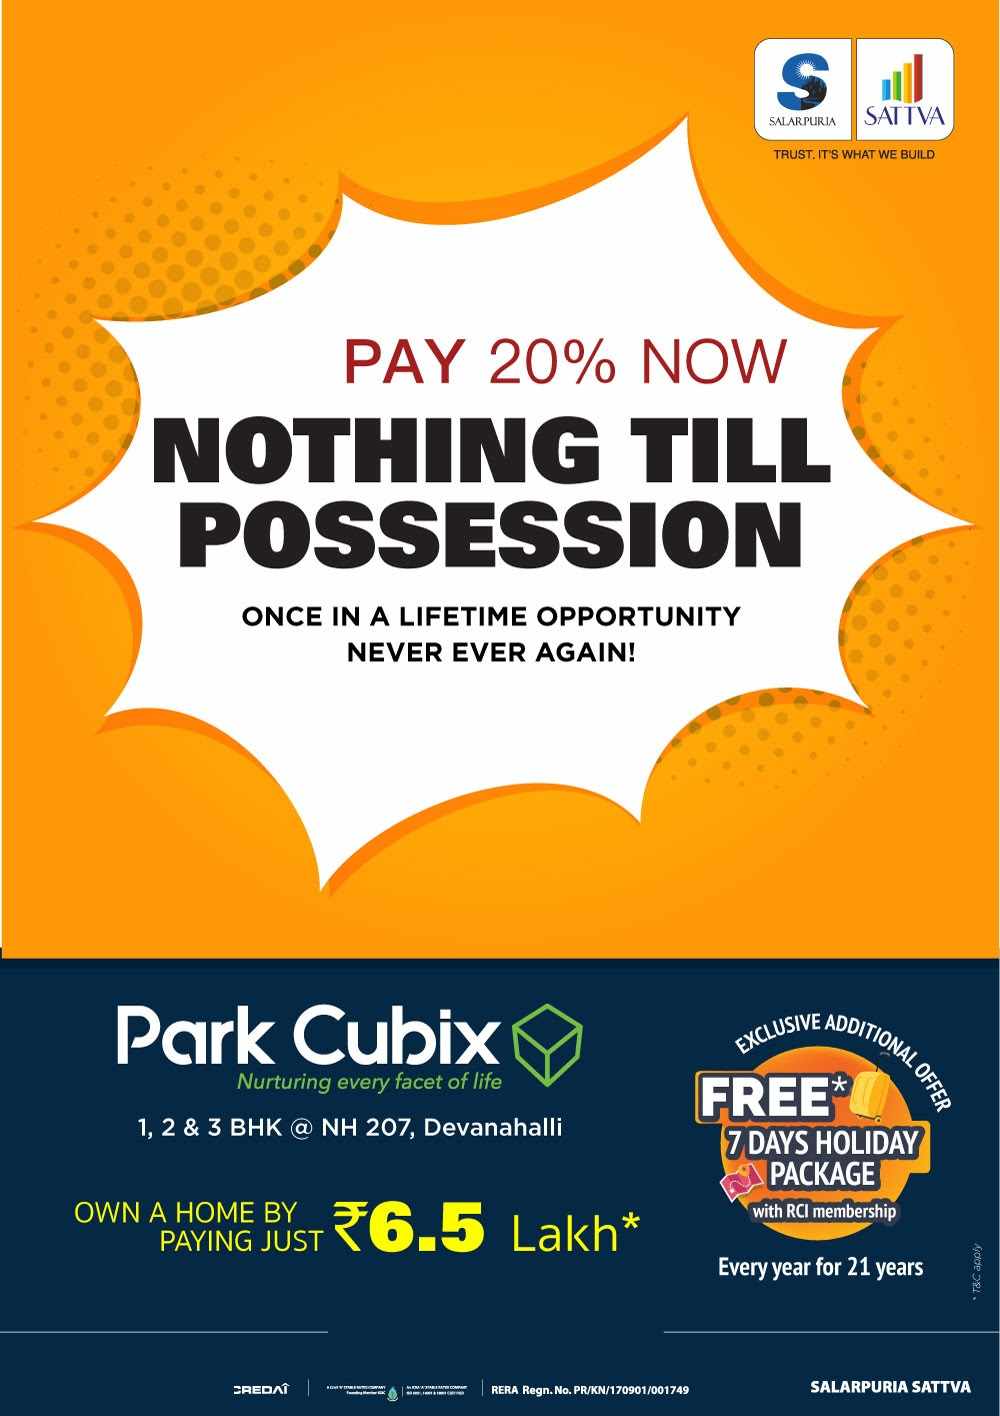 Pay just Rs. 6.5 Lakh and own a home at Salarpuria Sattva Park Cubix in Bangalore Update